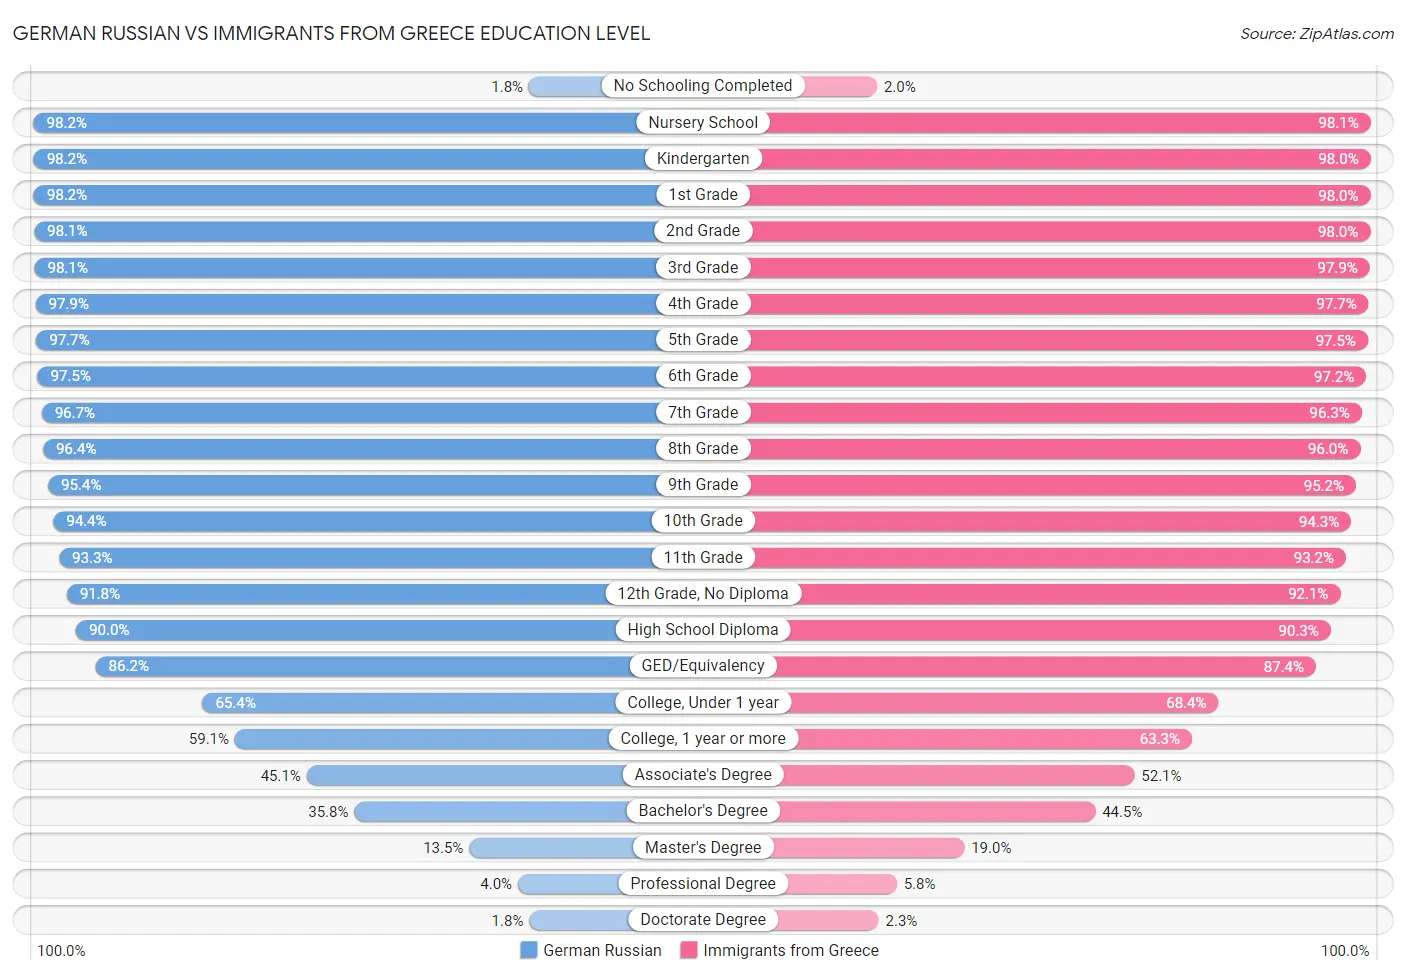 German Russian vs Immigrants from Greece Education Level